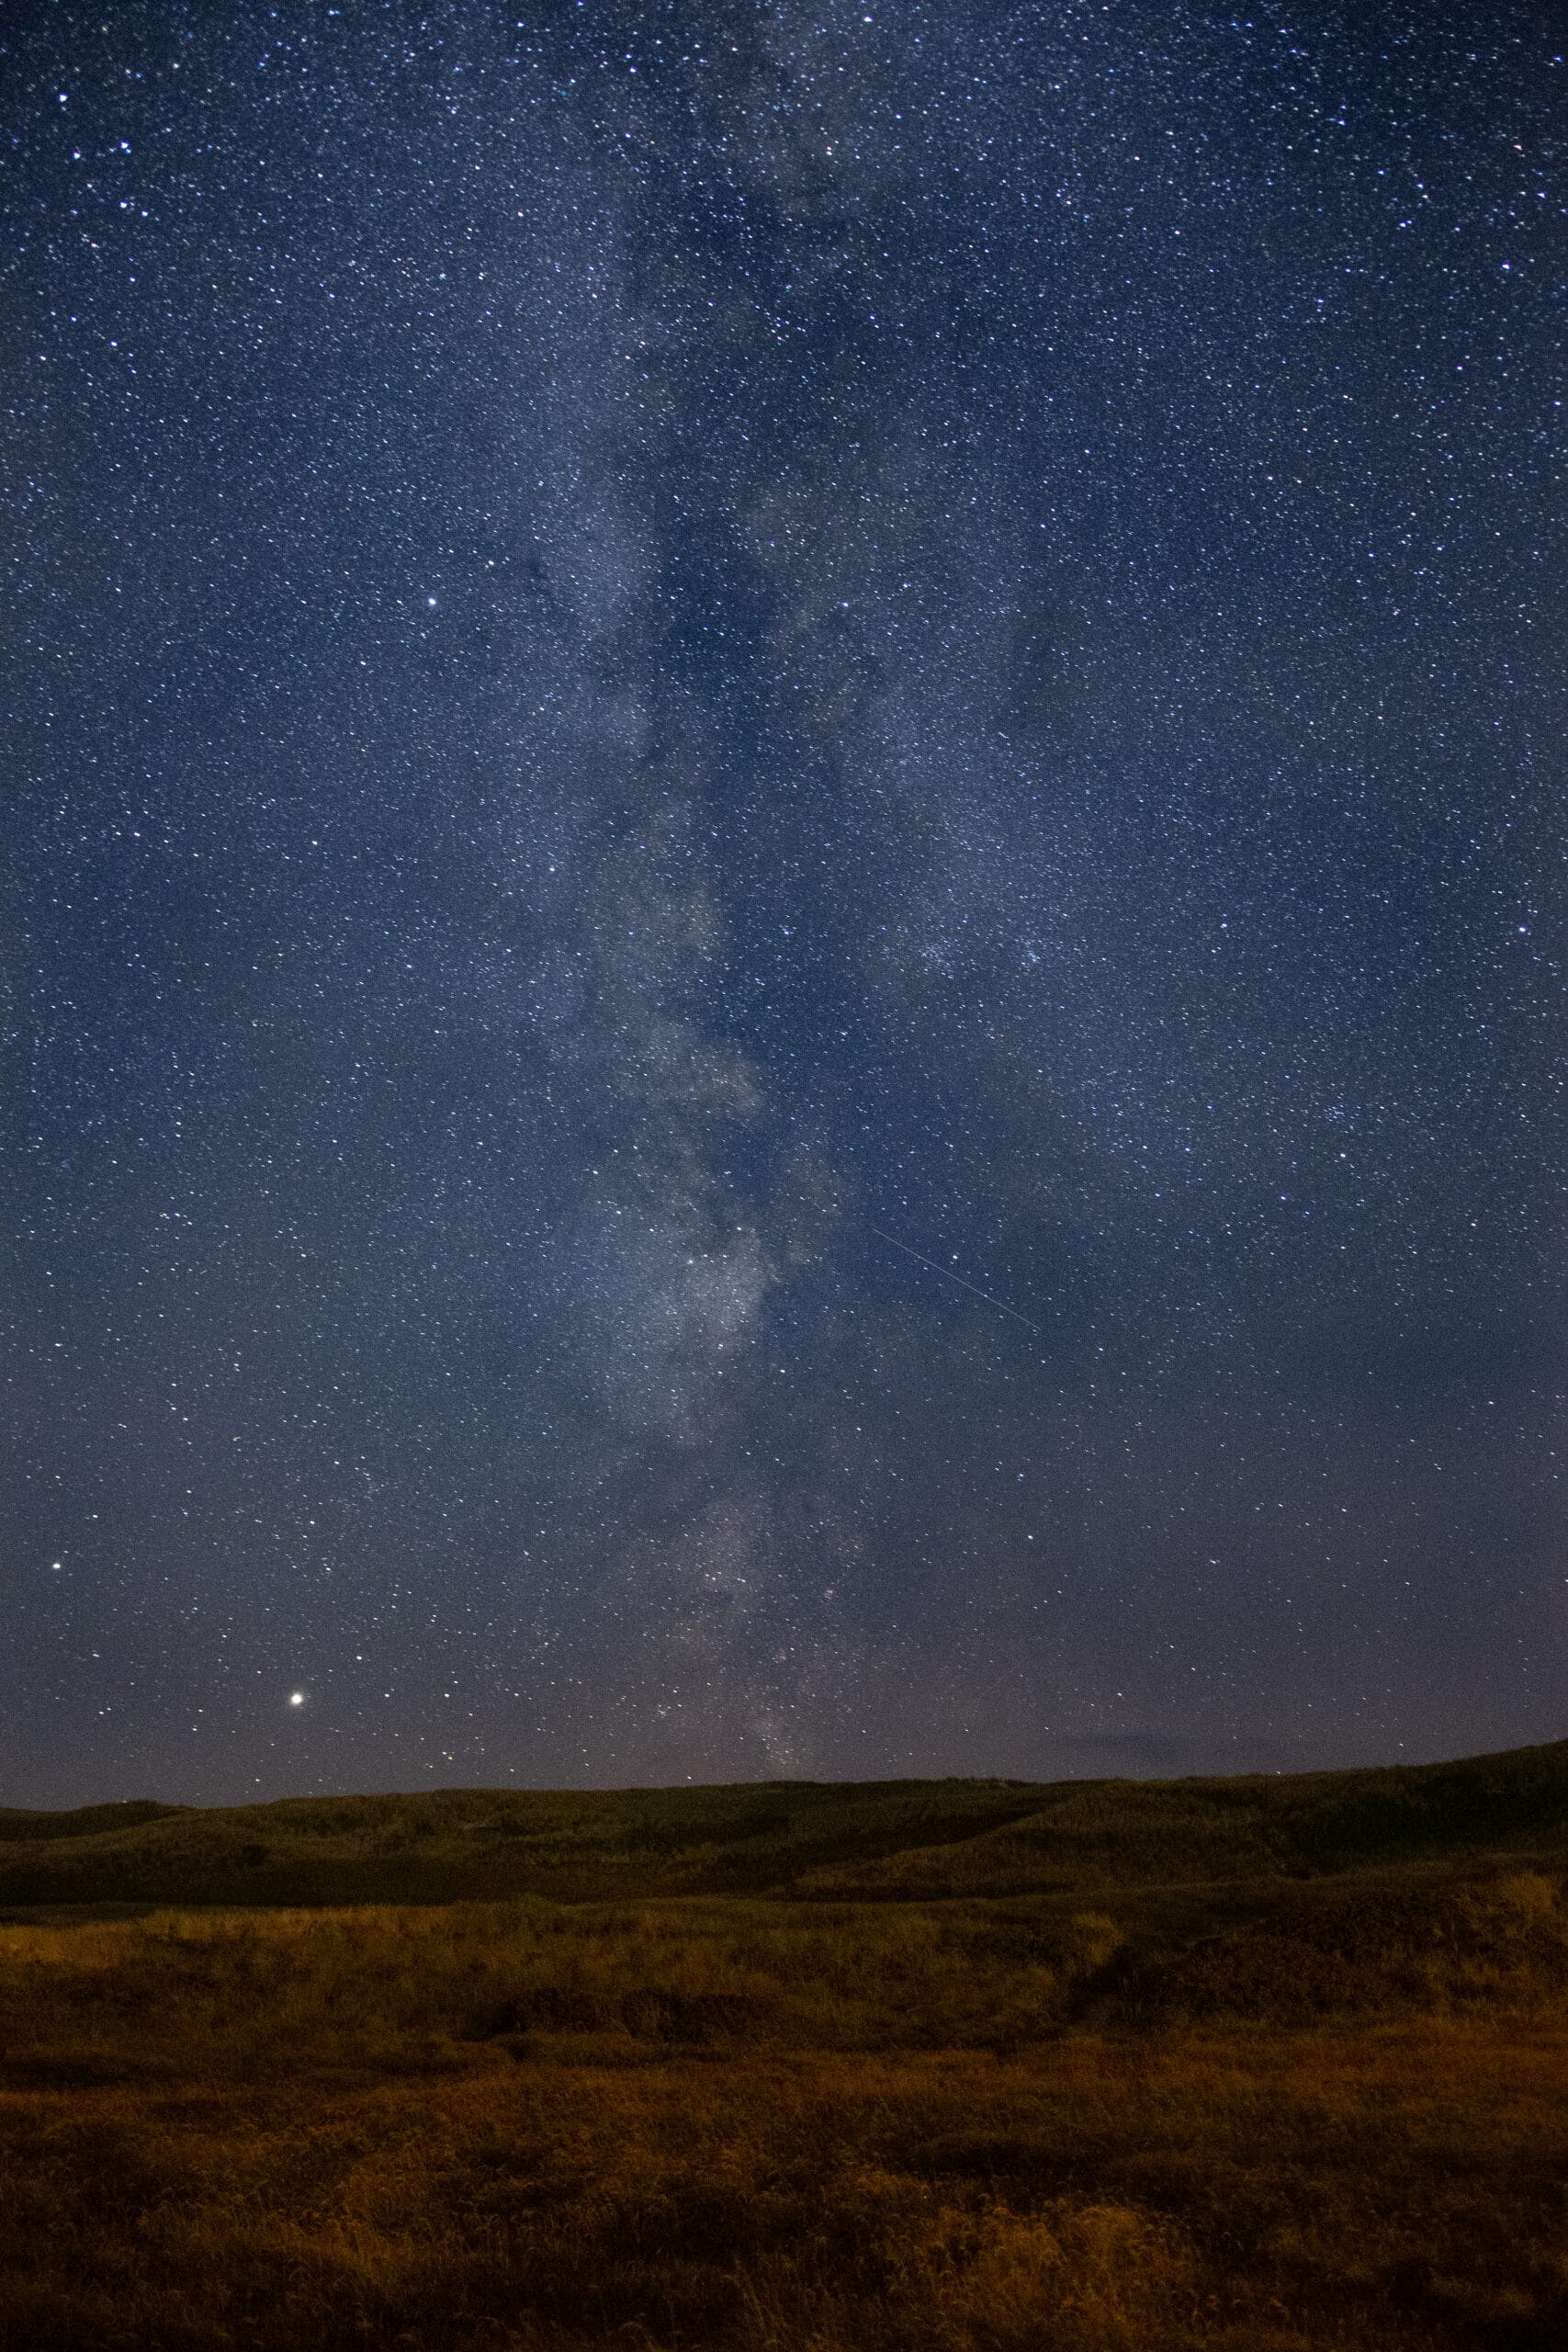 With the right white balance, the depths of the Milky Way reveal themselves particularly impressively.